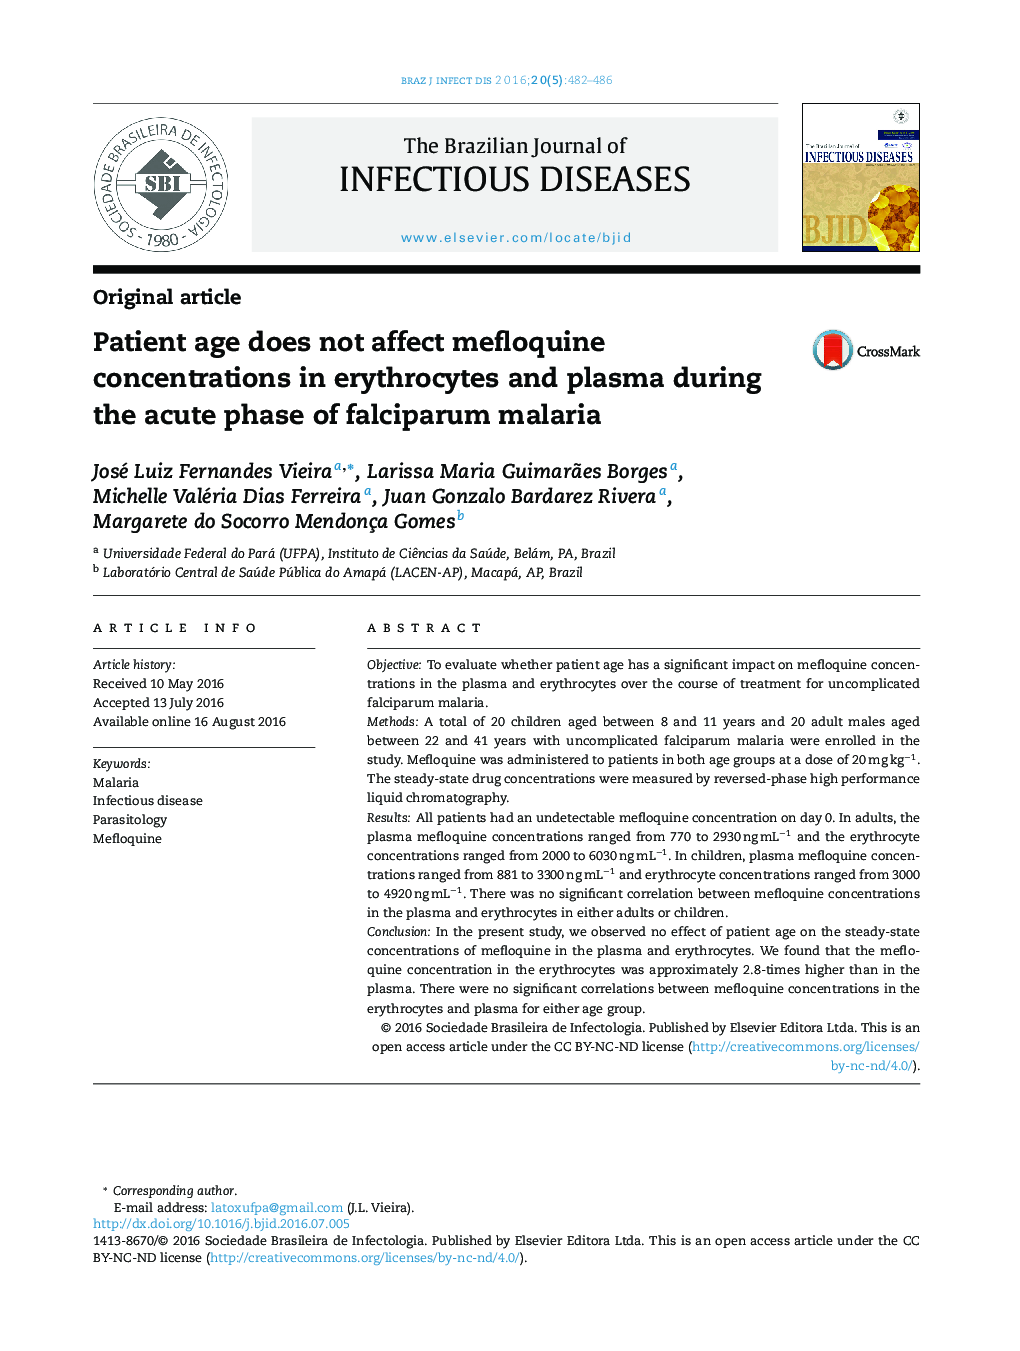 Patient age does not affect mefloquine concentrations in erythrocytes and plasma during the acute phase of falciparum malaria